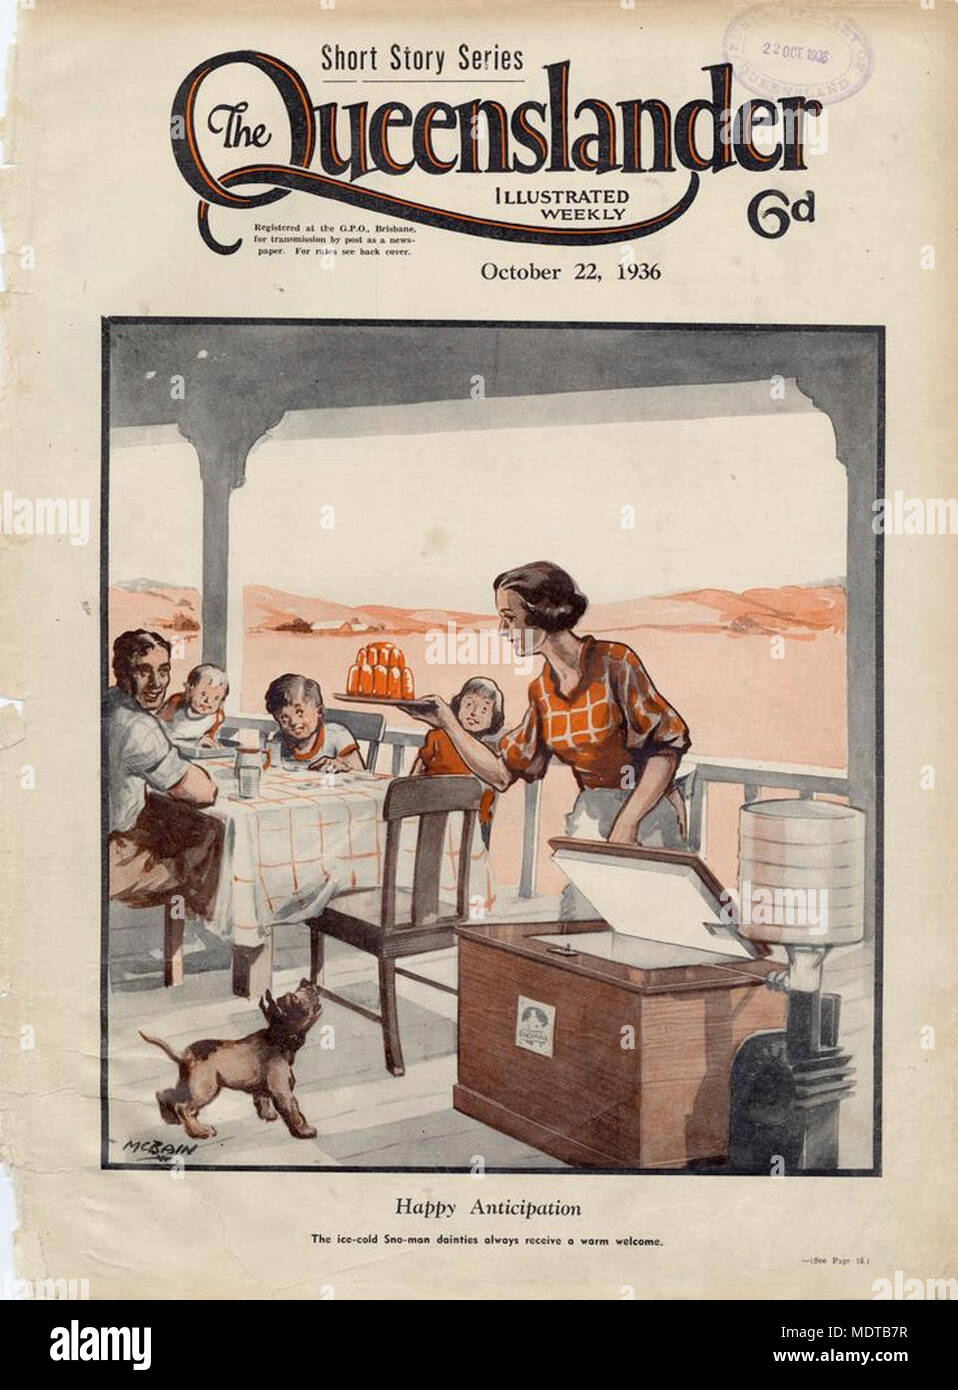 Illustrated front cover from The Queenslander, October 22, 1936. Location: Queensland, Australia   Description: Caption: Happy anticipation : The ice-cold Sno-Man dainties always receive a warm welcome. The mother takes out some ice-cold treats from the Sno-man ice box, while the family sits at the table in anticipation. Stock Photo